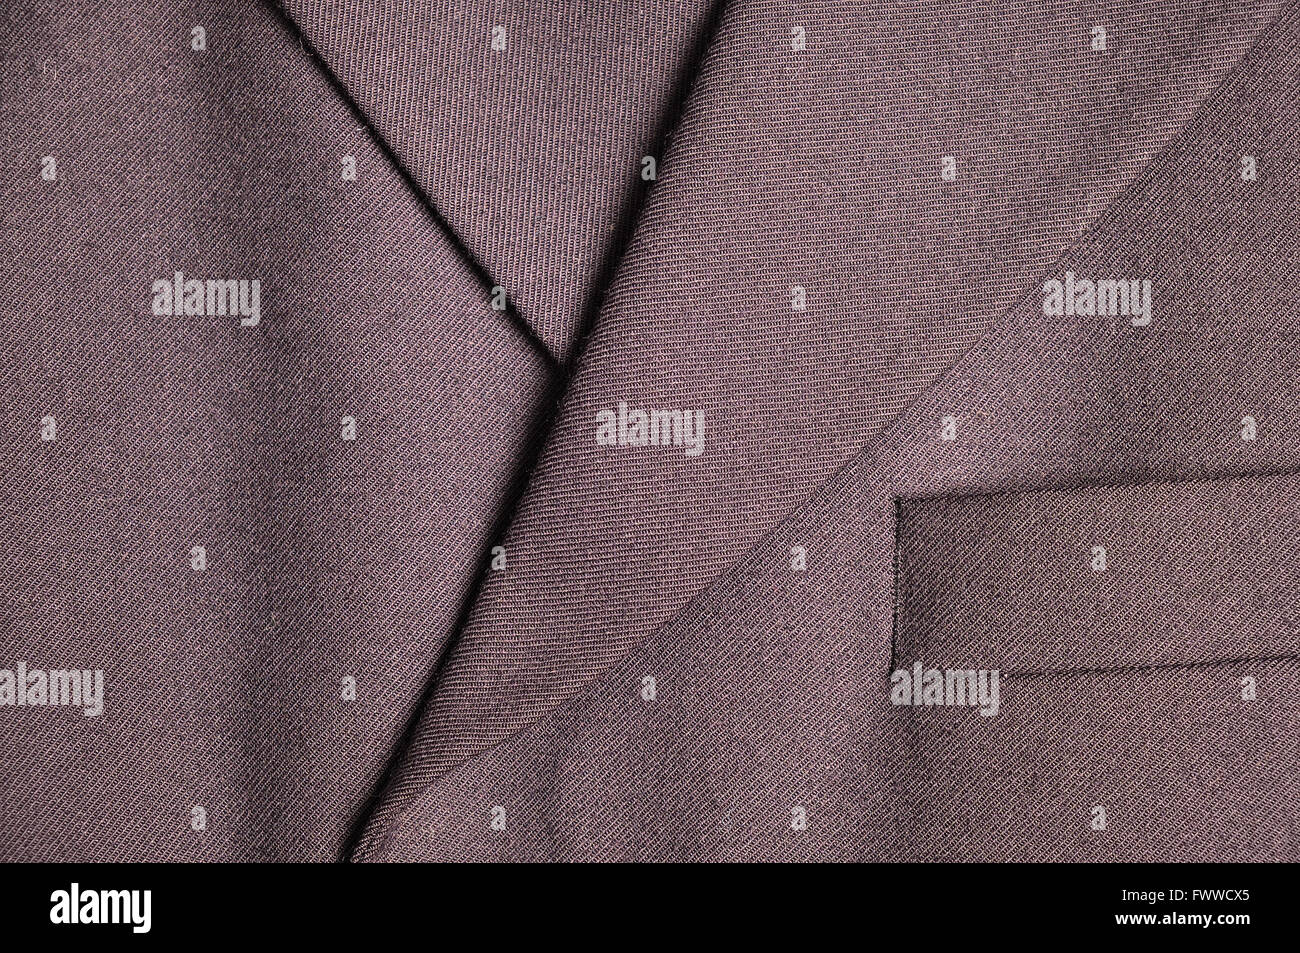 Classic business suit detail. Fashion, textures and backgrounds Stock Photo